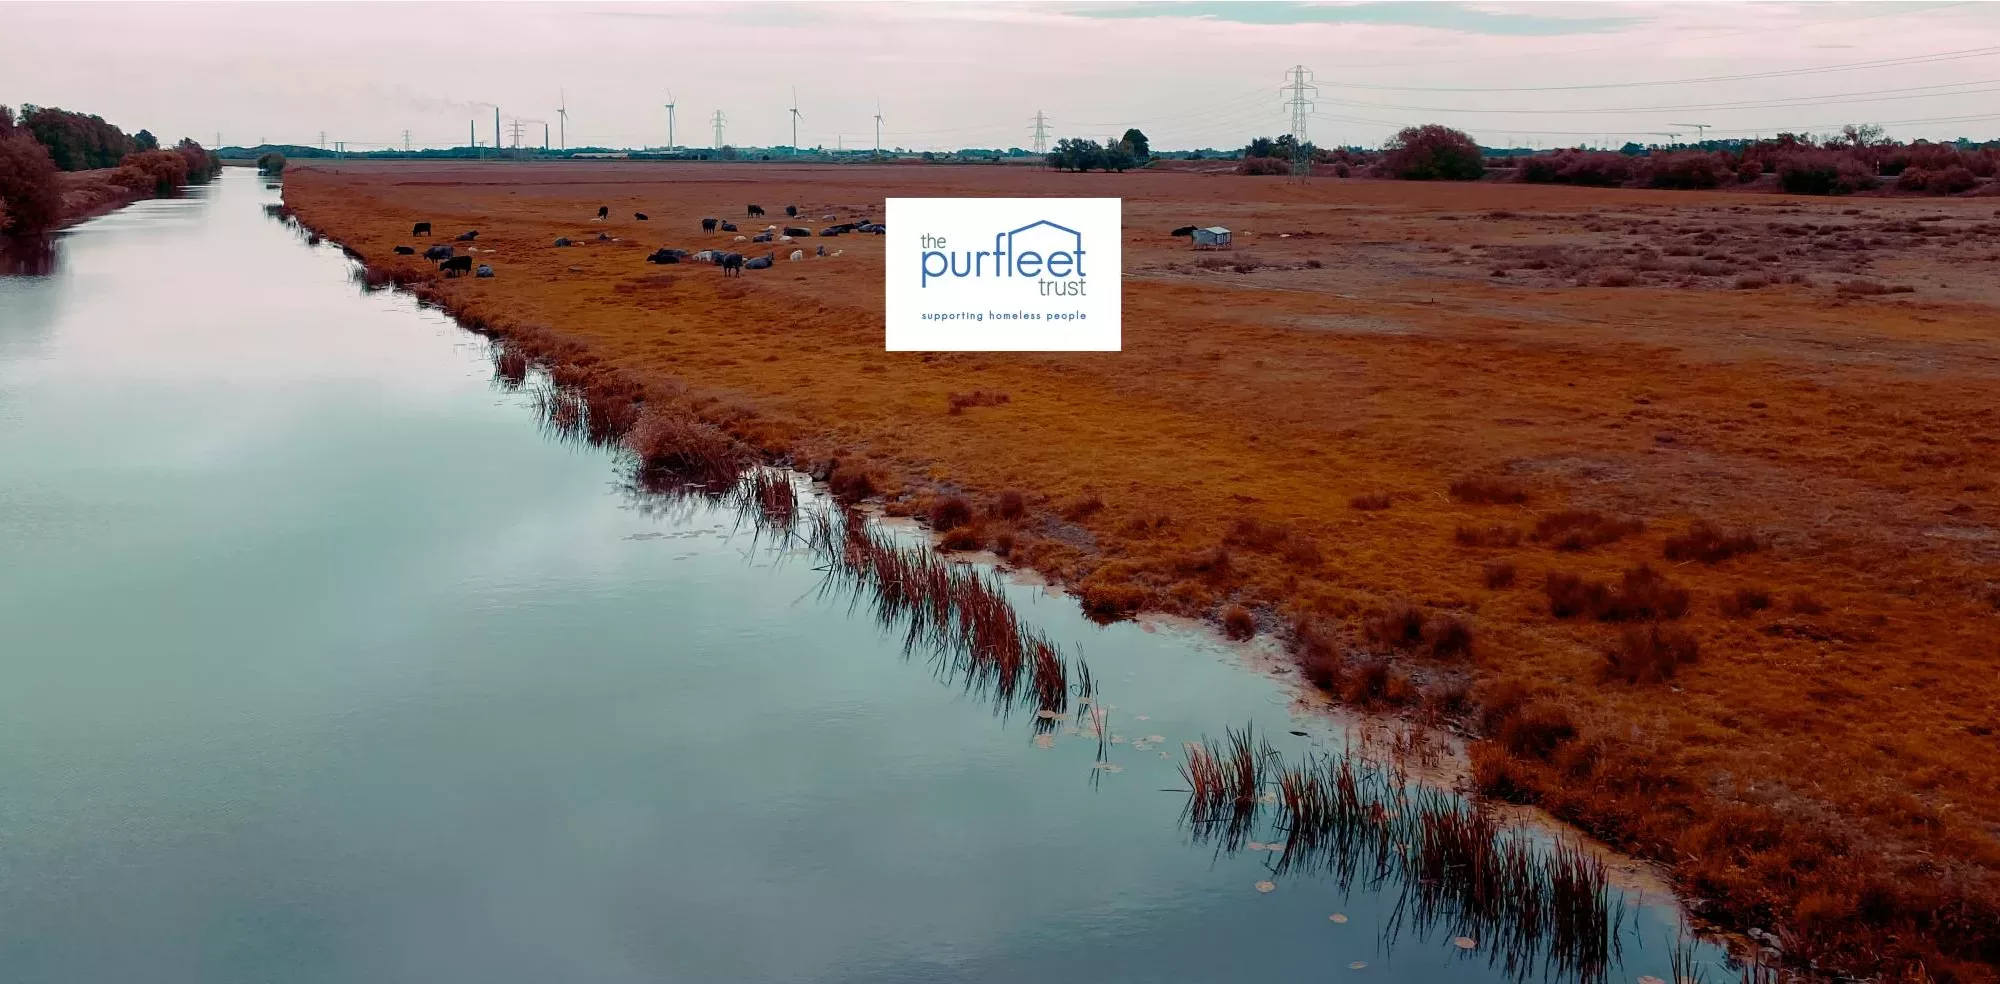 Charities - The Purfleet Trust Logo Displayed Over An Image Of The River Nene